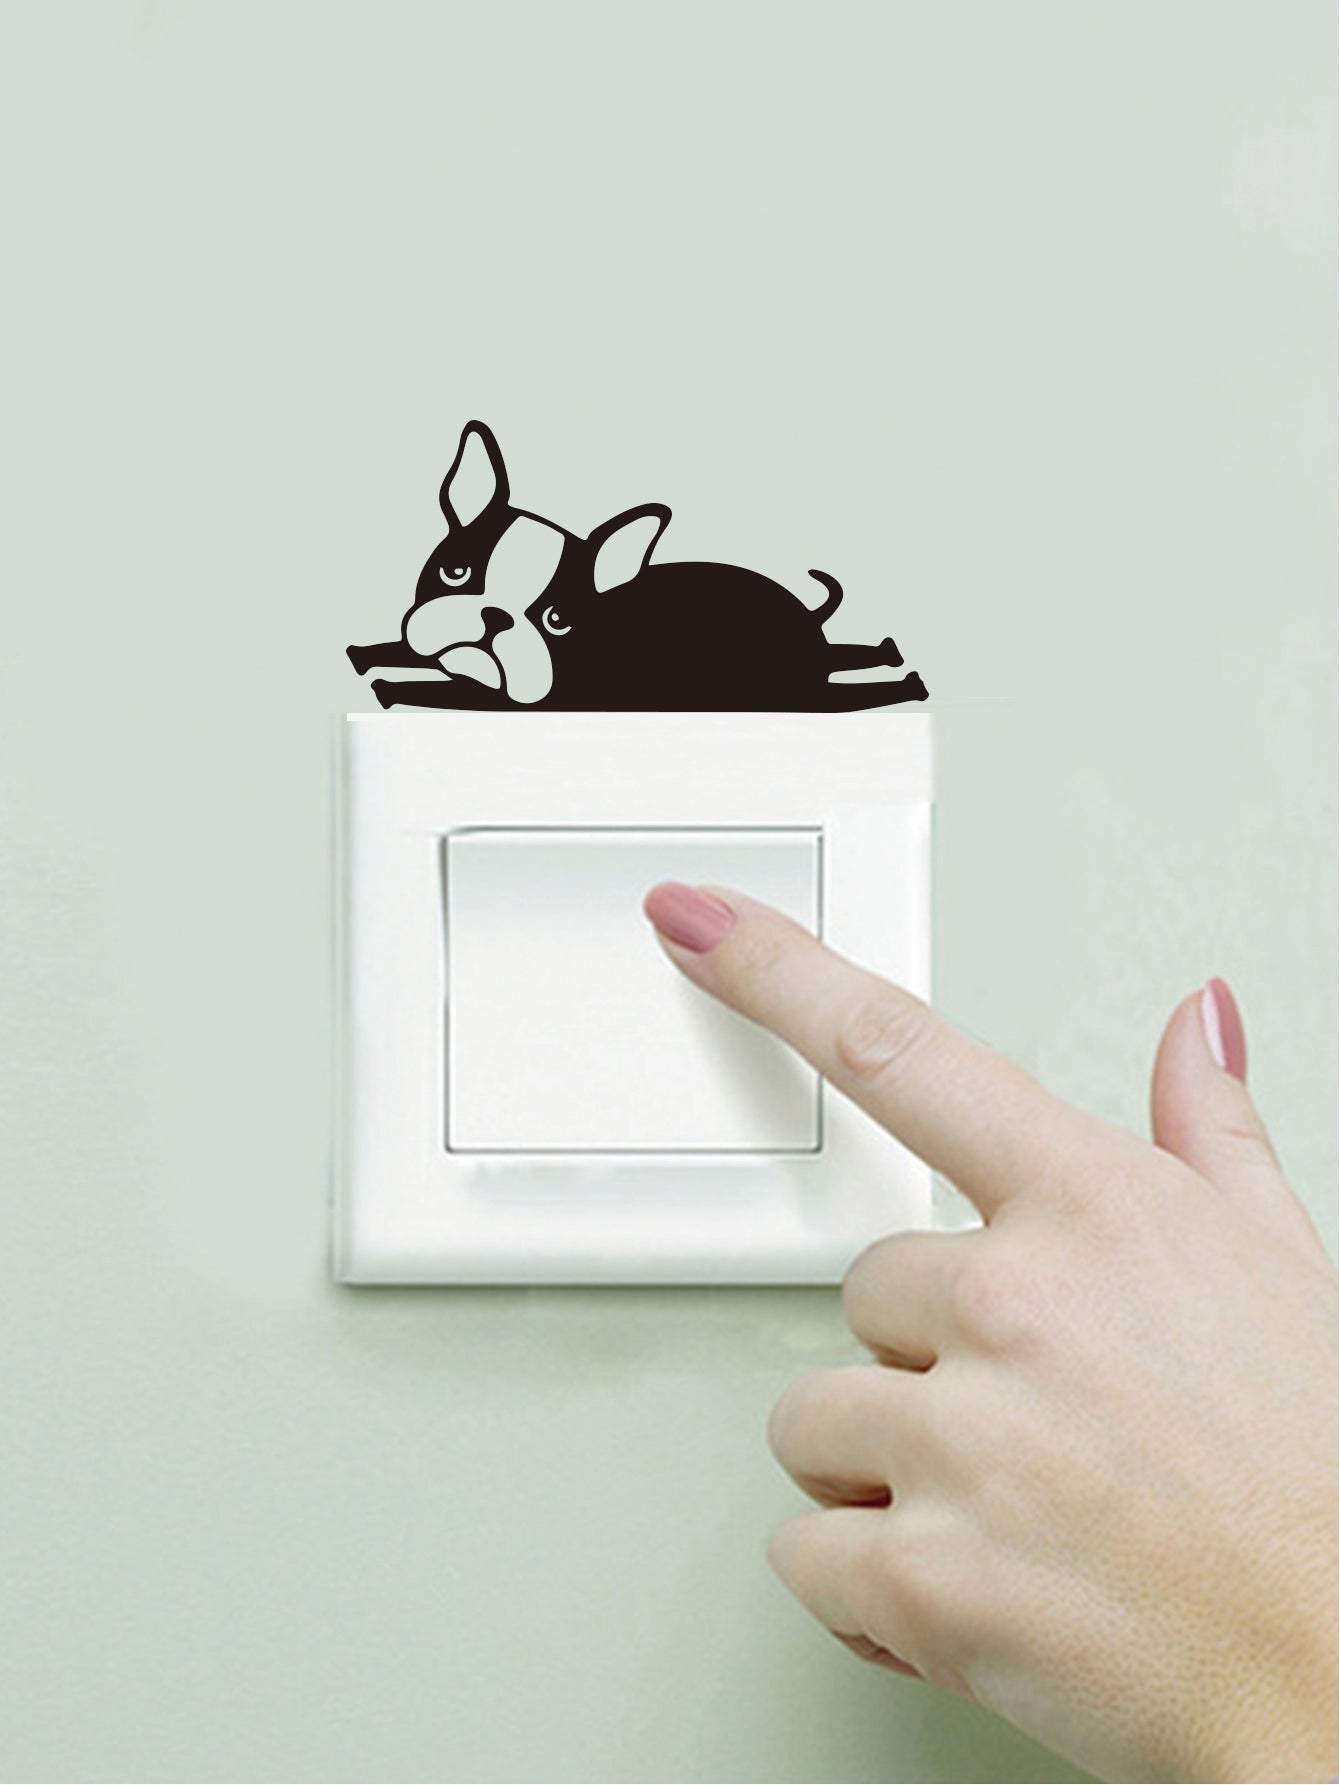 6pcs Dog Print Switch Outlet Wall Sticker